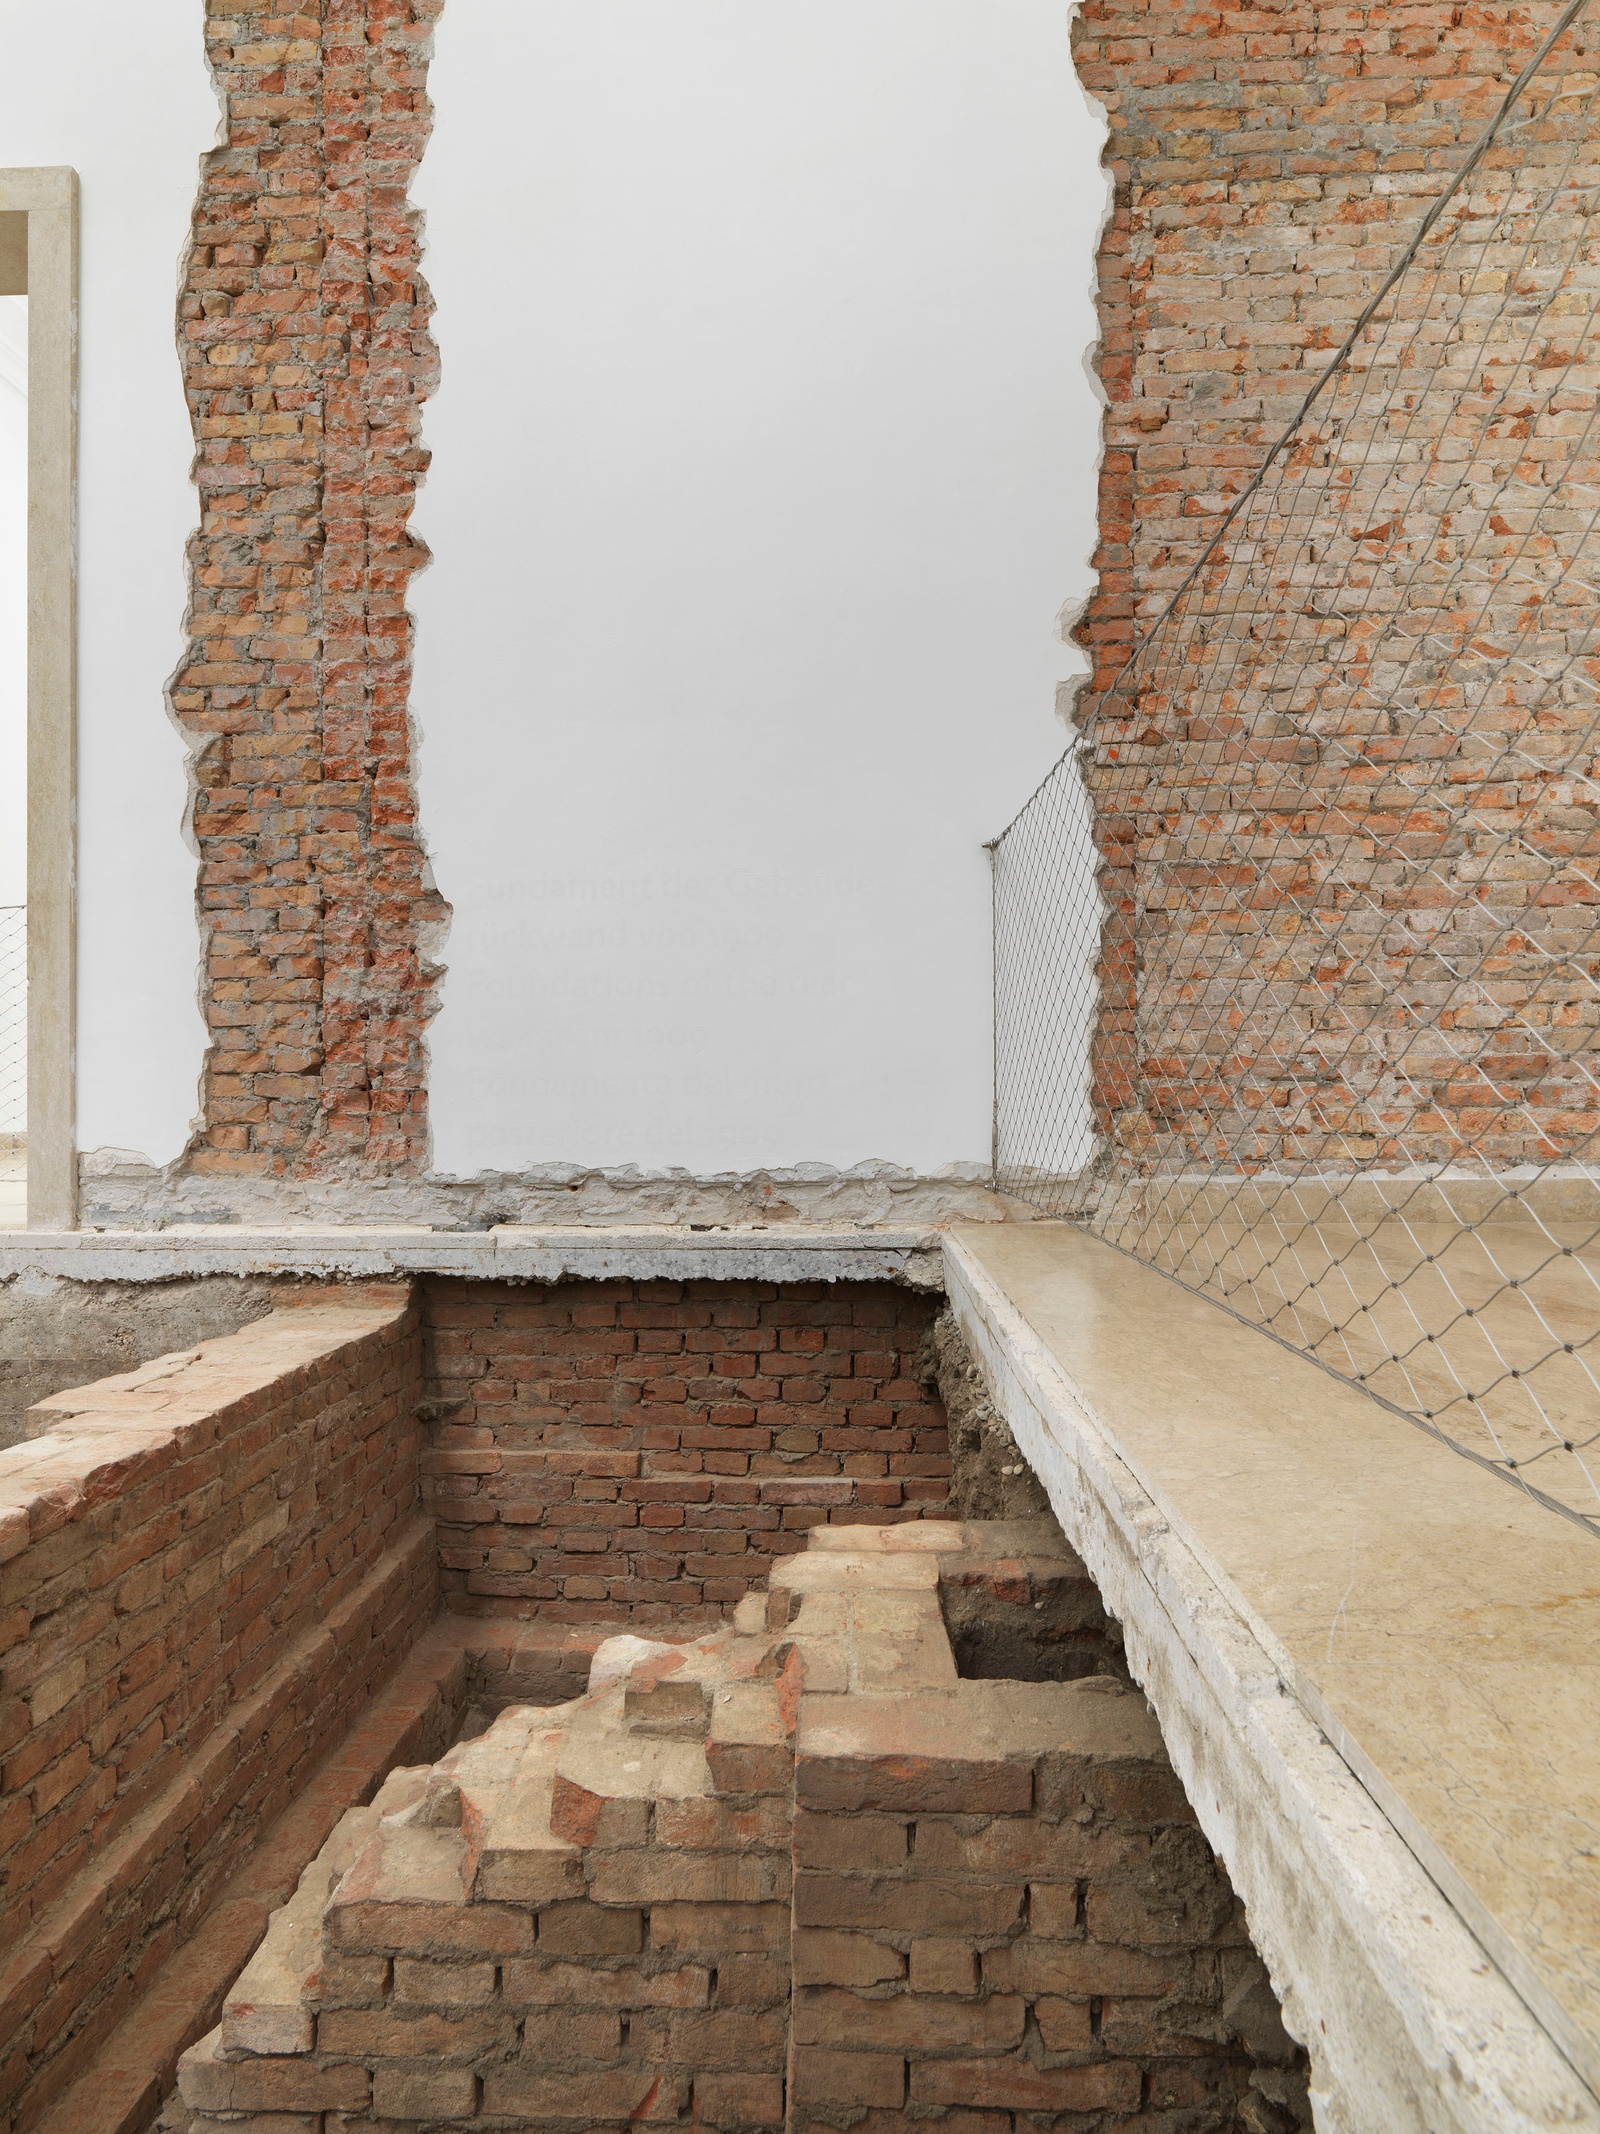 Maria Eichhorn, Relocating a Structure. German Pavilion 2022, 59th International Art Exhibition – La Biennale di Venezia, 2022, detail: Foundations of the rear wall from 1909; rear wall of the building from 1909, interior wall from 1938, demolished in 1964; wall lettering; chimney from an earlier building (undated); doorway to the right side room from 1909, walled up in 1912, exhibition view, © Maria Eichhorn / VG Bild-Kunst, Bonn 2022, photo: Jens Ziehe